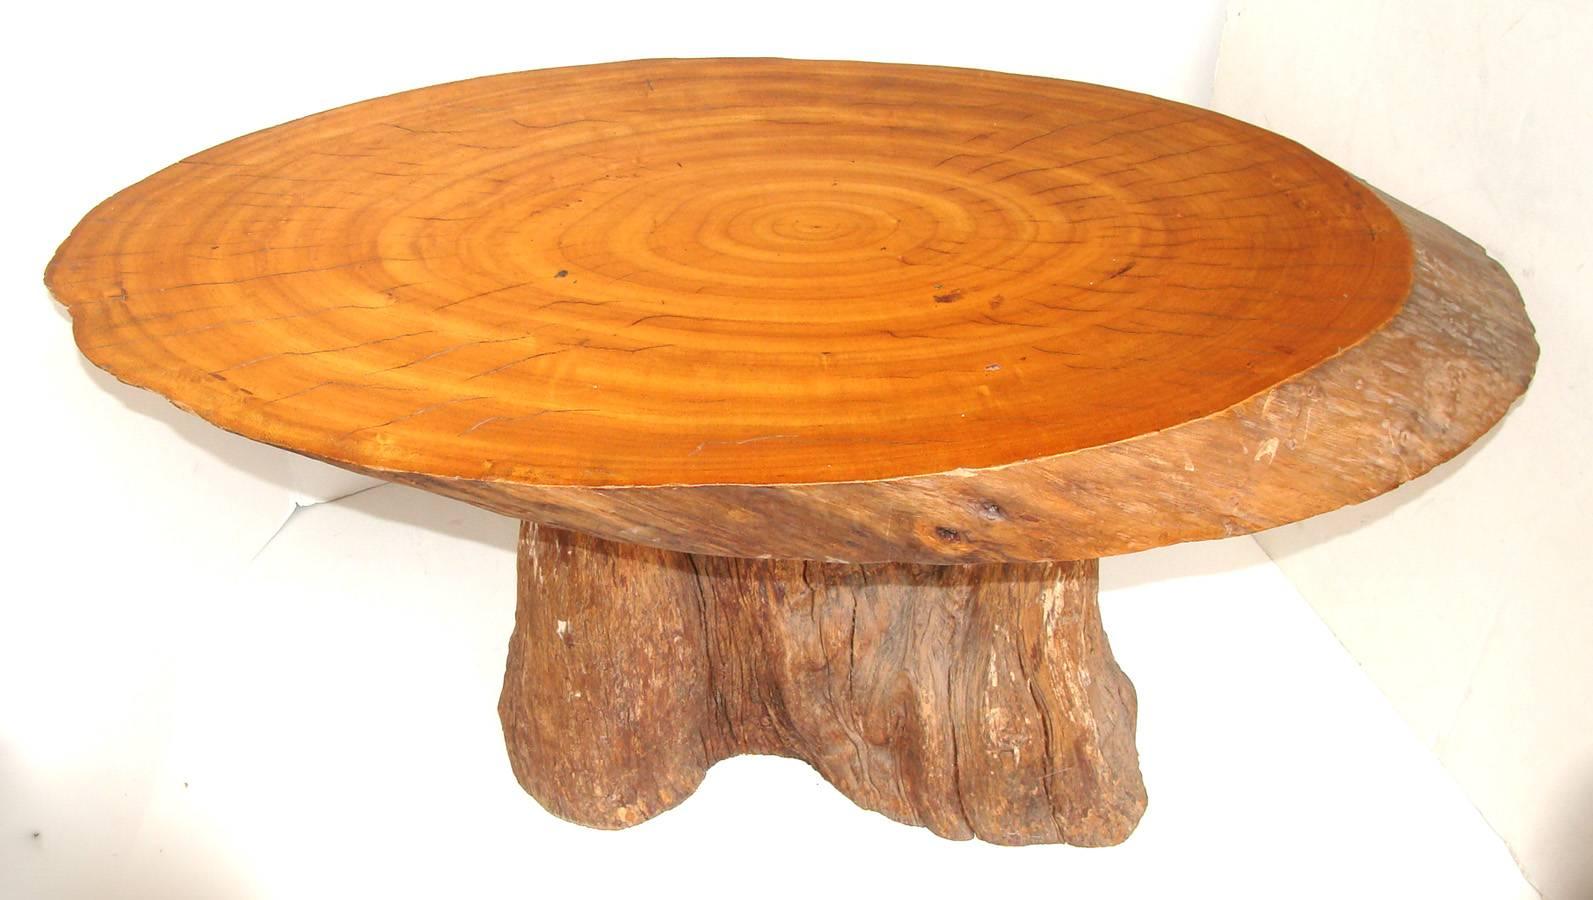 Charming vintage coffee table or side table. Slab top exhibits beautiful grain and patina. Mounted on a driftwood base. Perfect anywhere--be it beach house, mountain cabin, or urban loft.